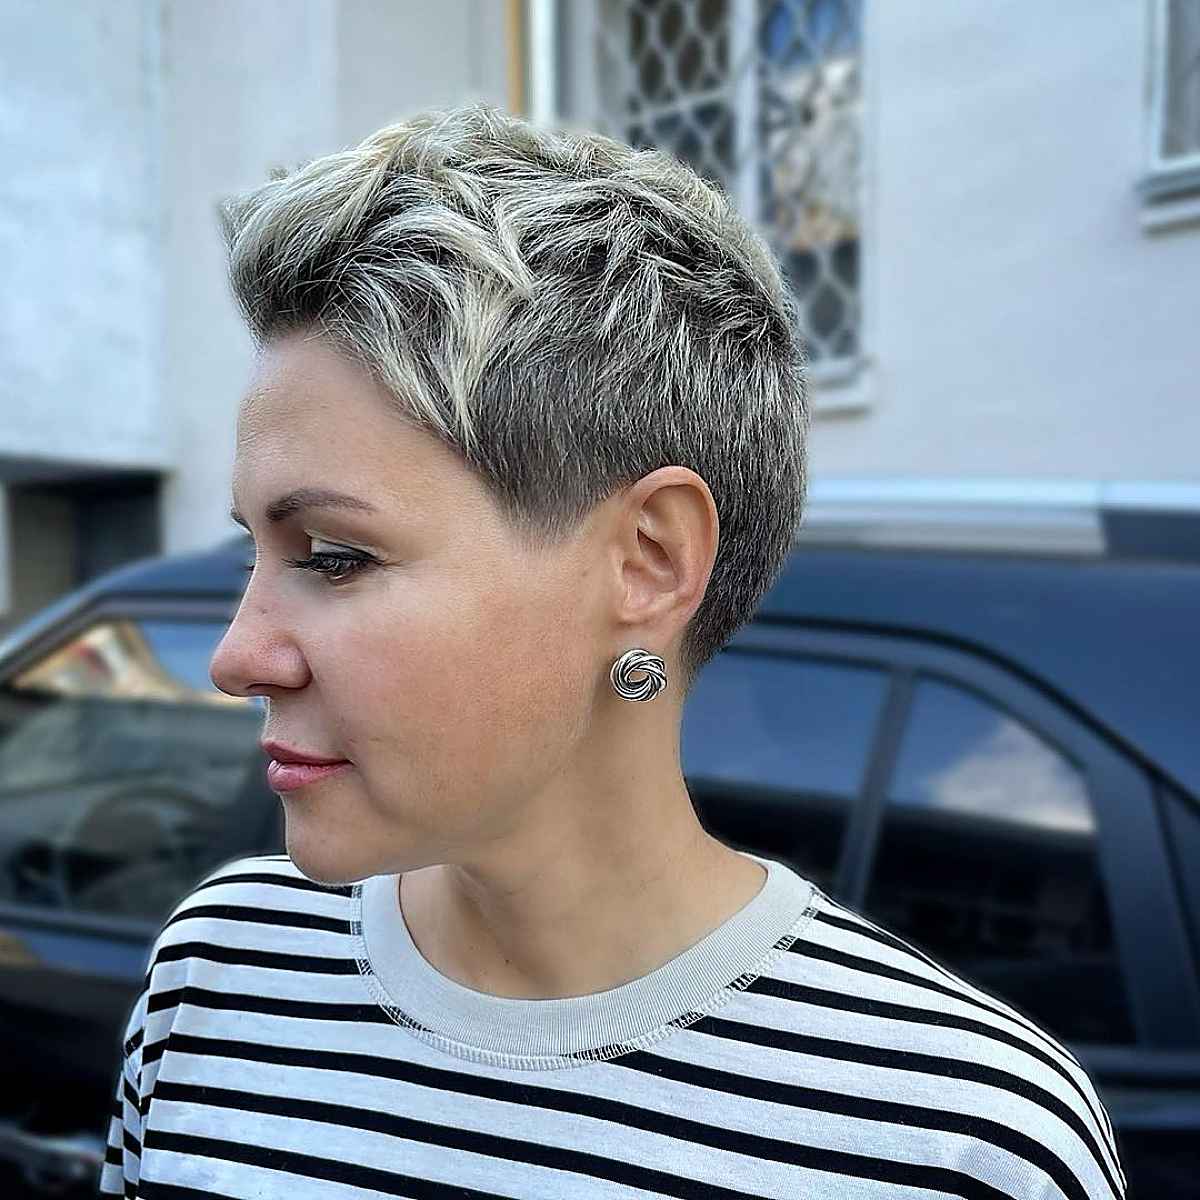 The cutest way to style a pixie cut